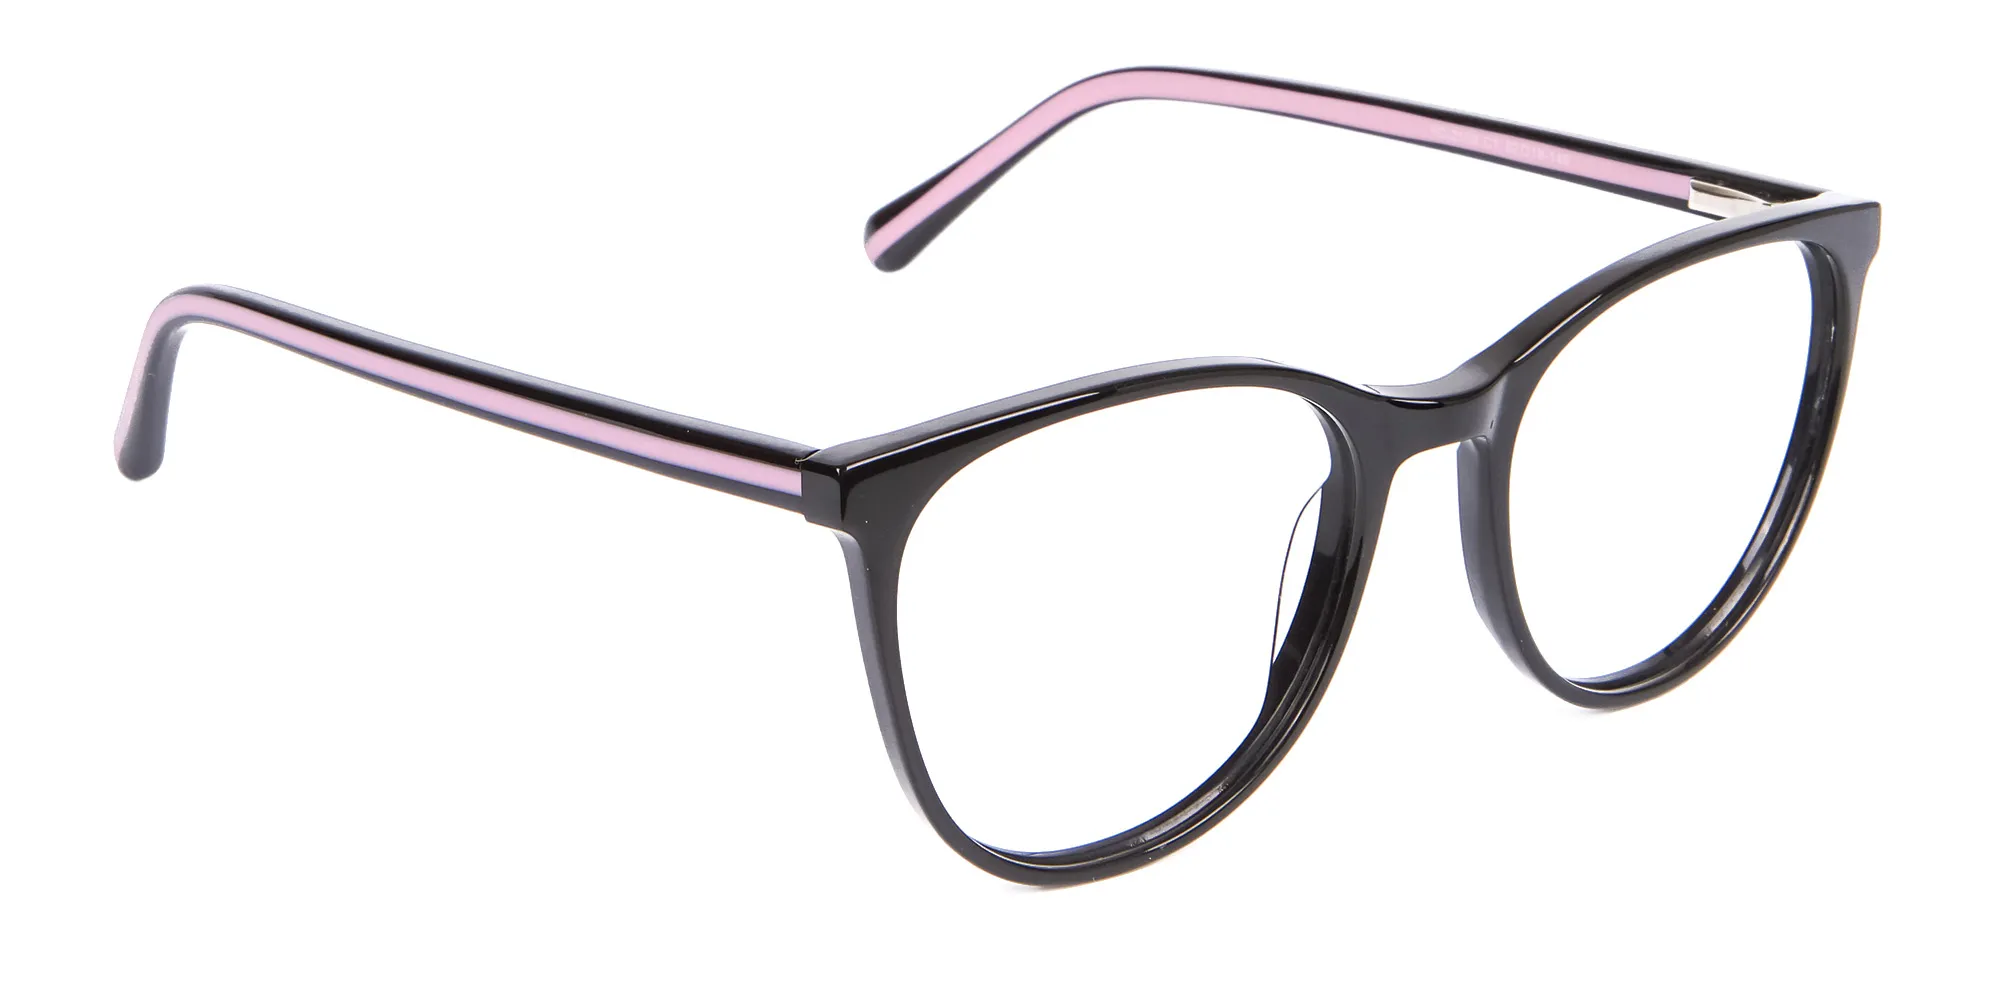 Retro Round Glasses in Black & Pink with Stripes - 2